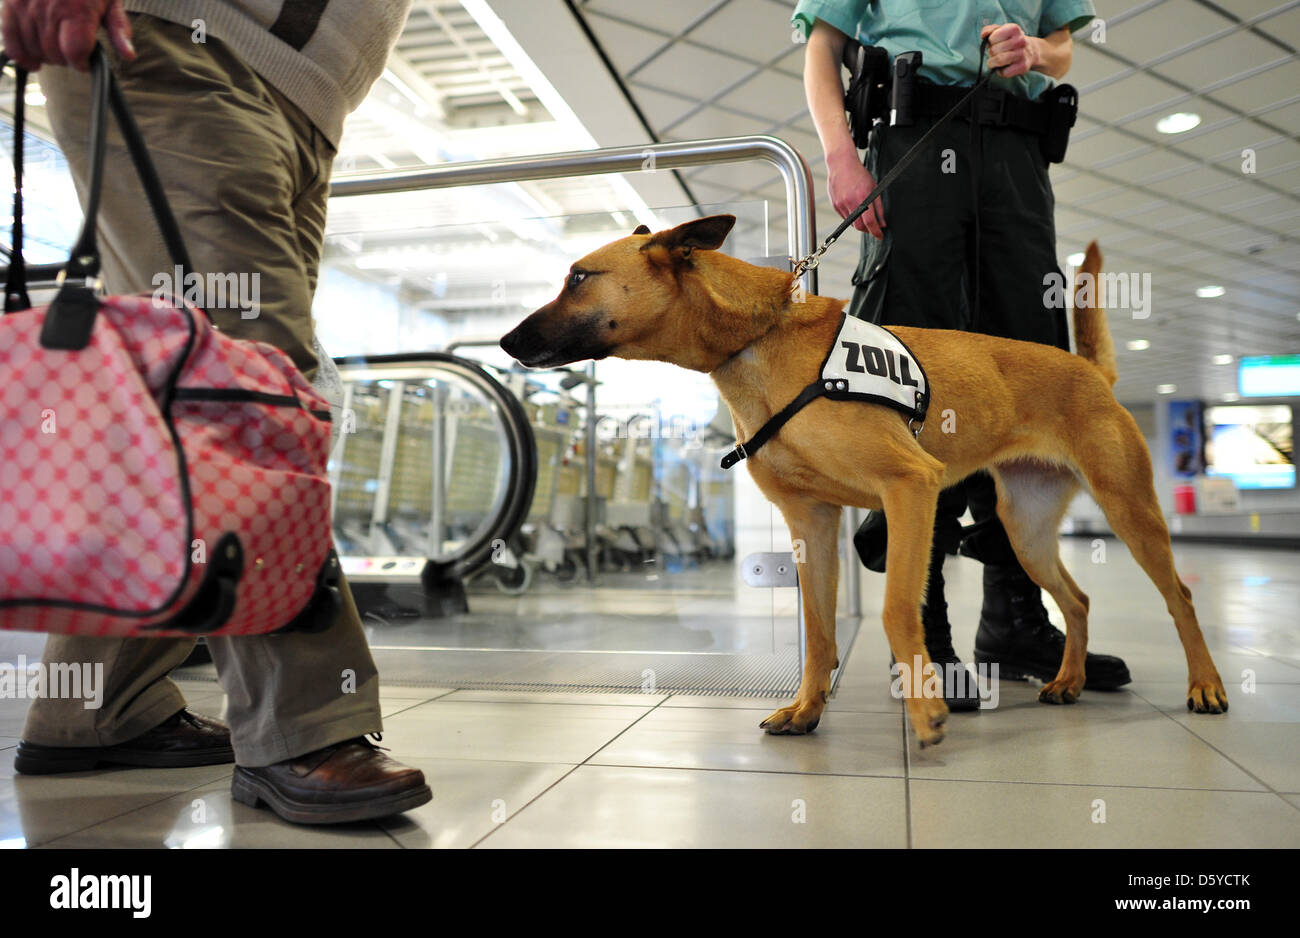 Drug sniffer dog Kathi from customs arrives for duty at the arrival area at the Leipzig/Halle airport in Leipzig, Germany, 04 April 2012. Customs officers in Saxony have confiscated markedly more counterfeit products and drog last year, according to the main customs office in Dresden at a press conference in Leipzig. Customs confiscated around 2500 packages of counterfeits word 9.1 Stock Photo